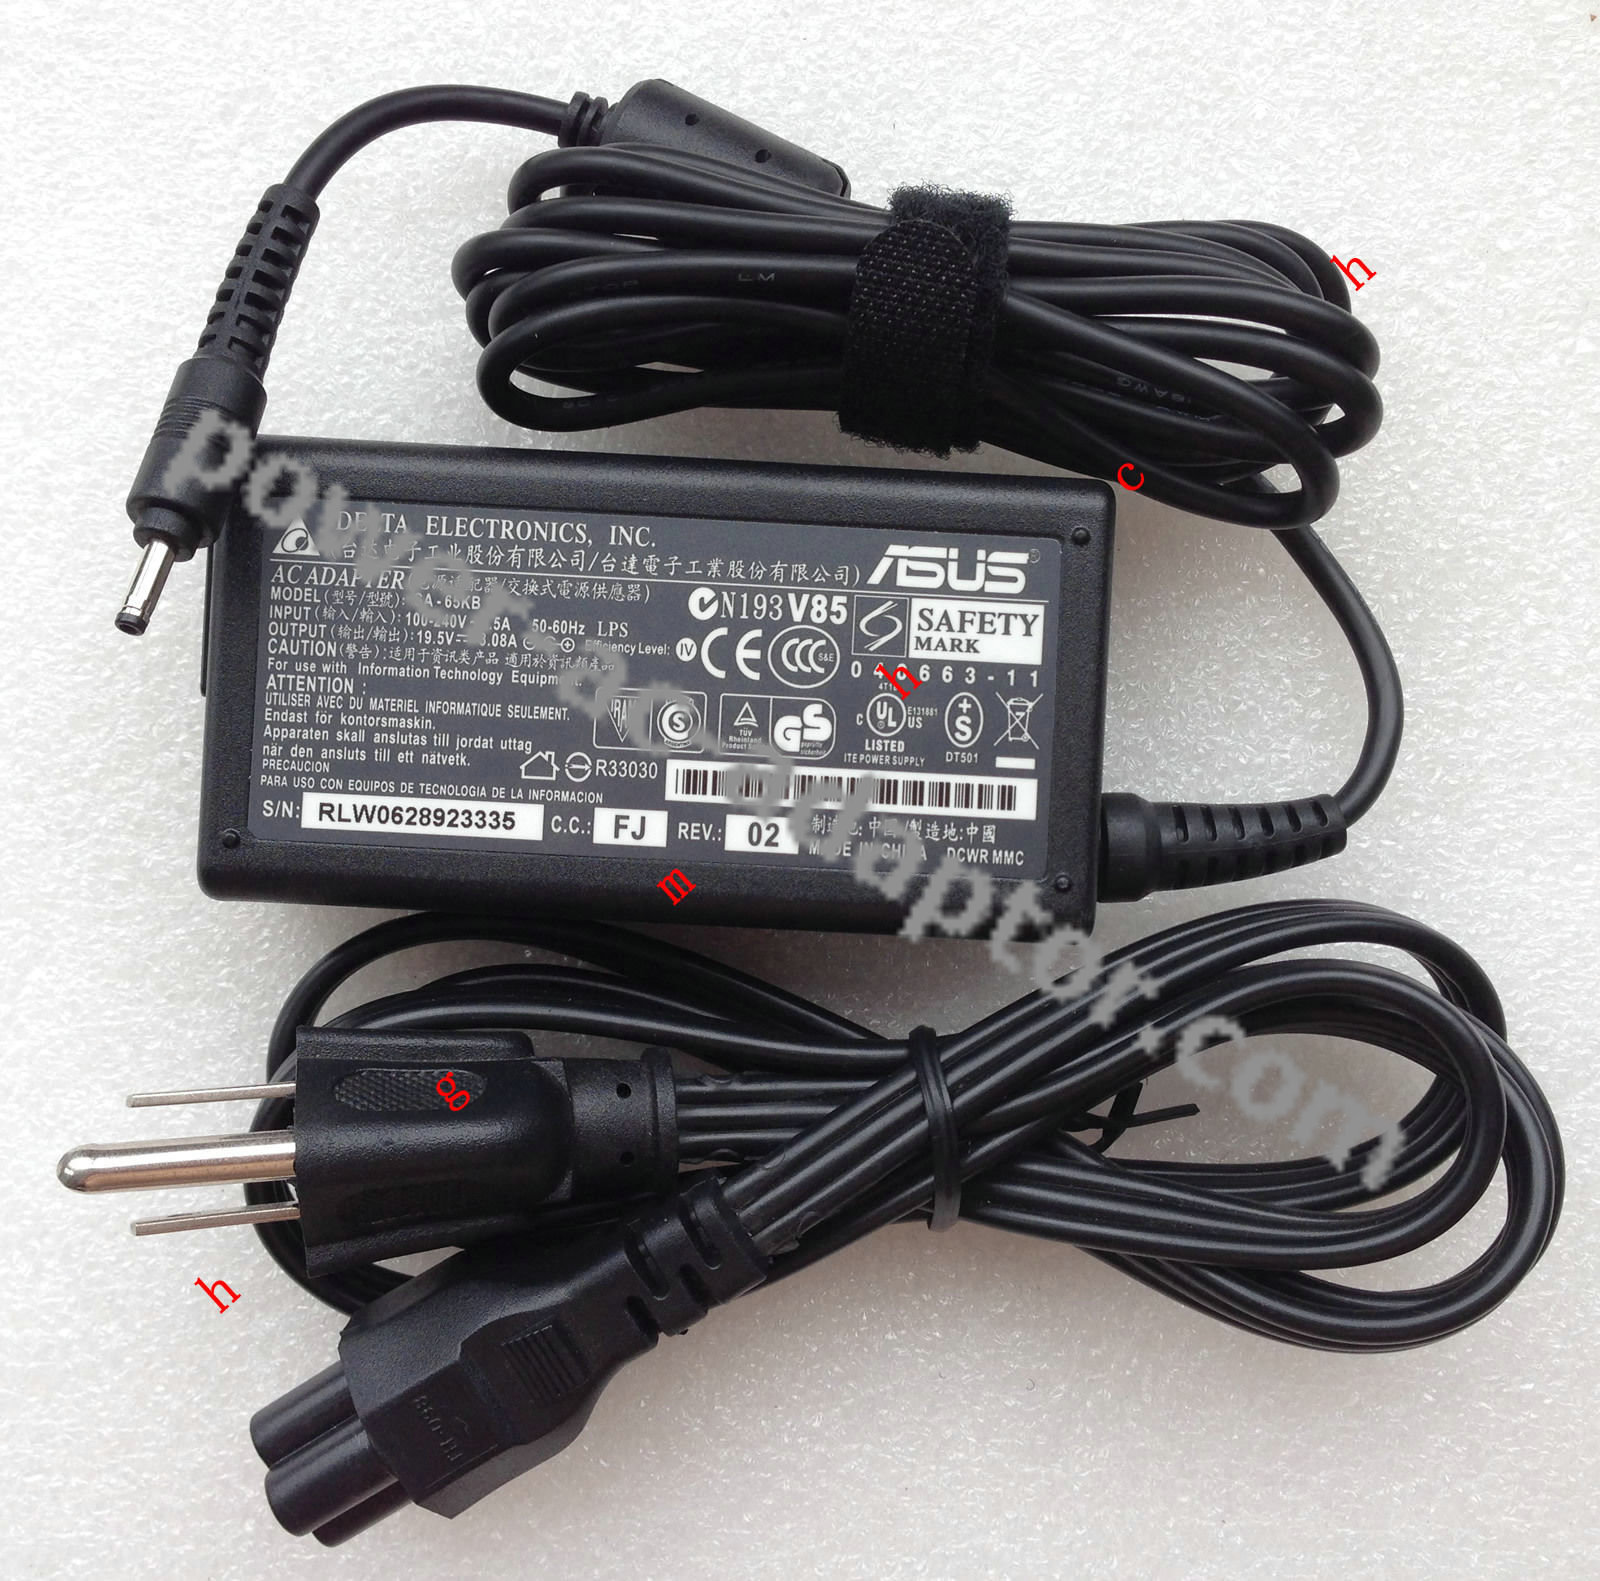 19.5V 3.08A Asus Eee Slate B121-1A016F AC power Adapter Charger